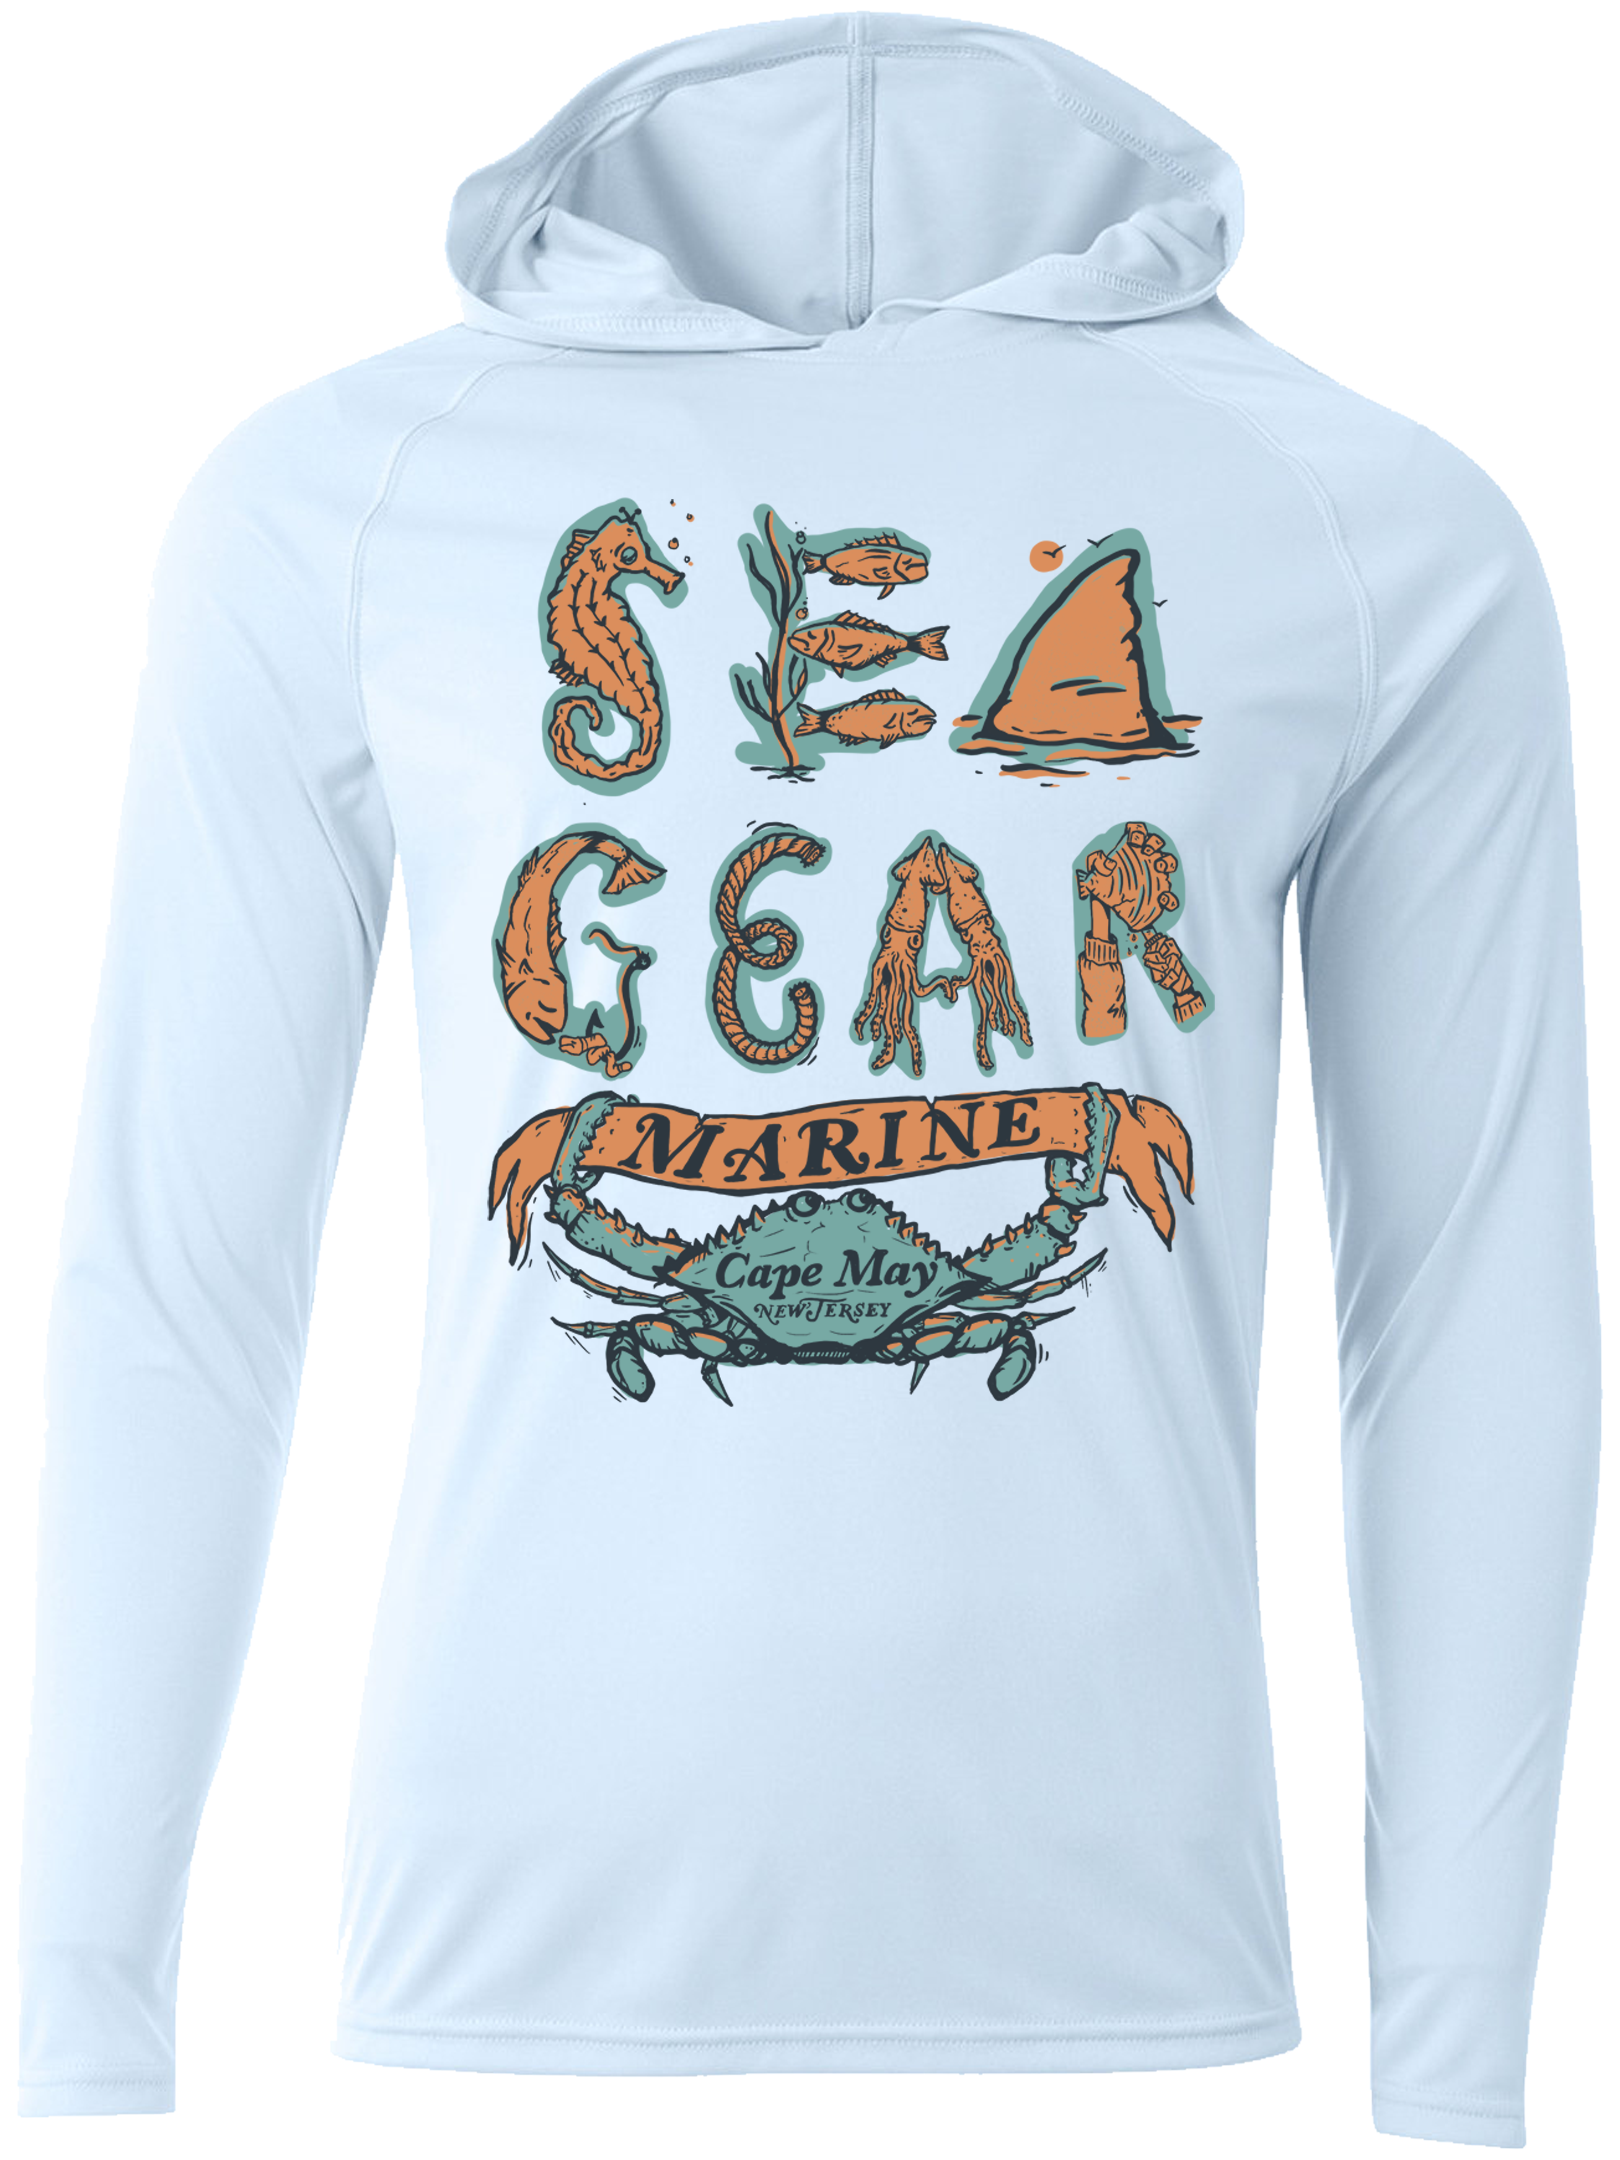 New To Sea Gear